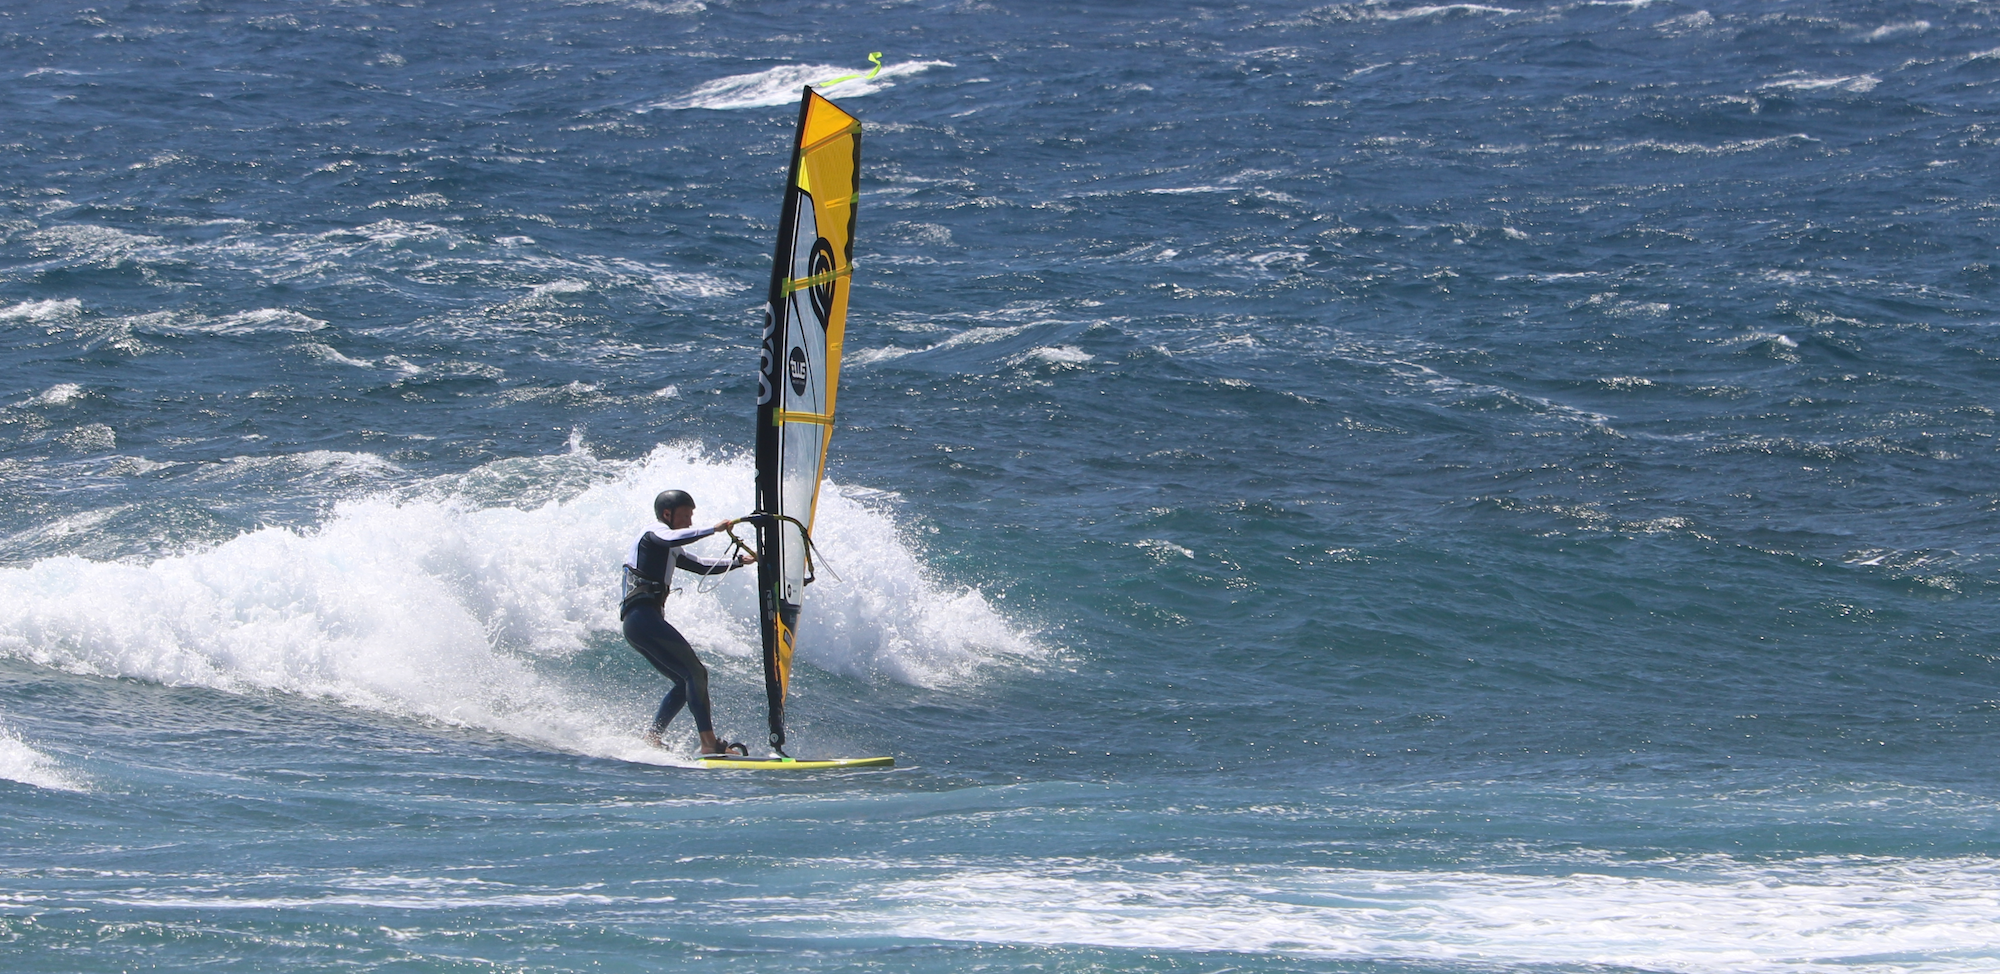 Windsurfing at El Medano in Tenerife –– the best feeling in the world...